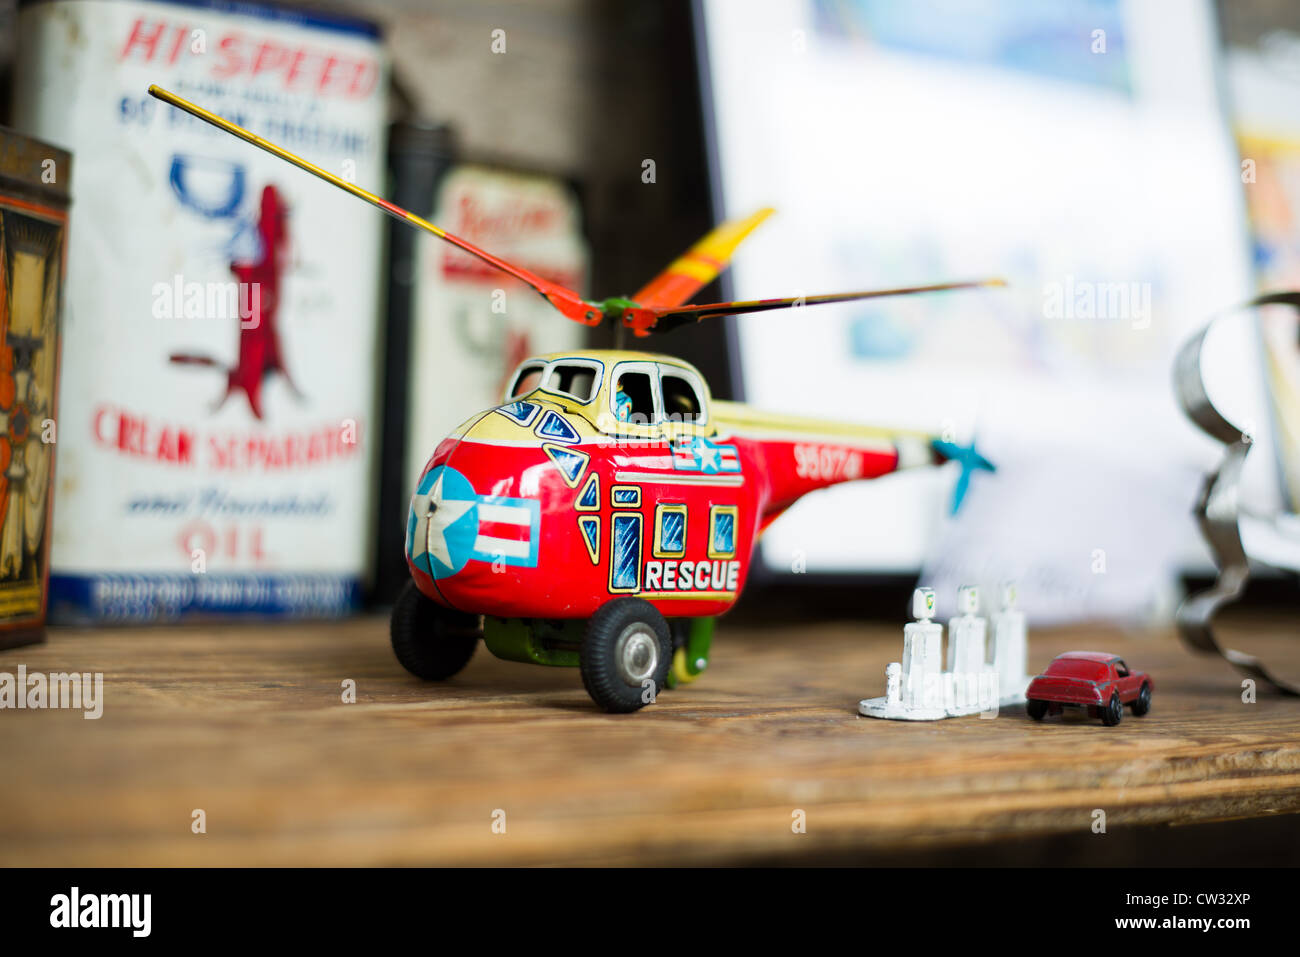 Antiques fair table of items including a tin toy rescue helicopter Stock Photo